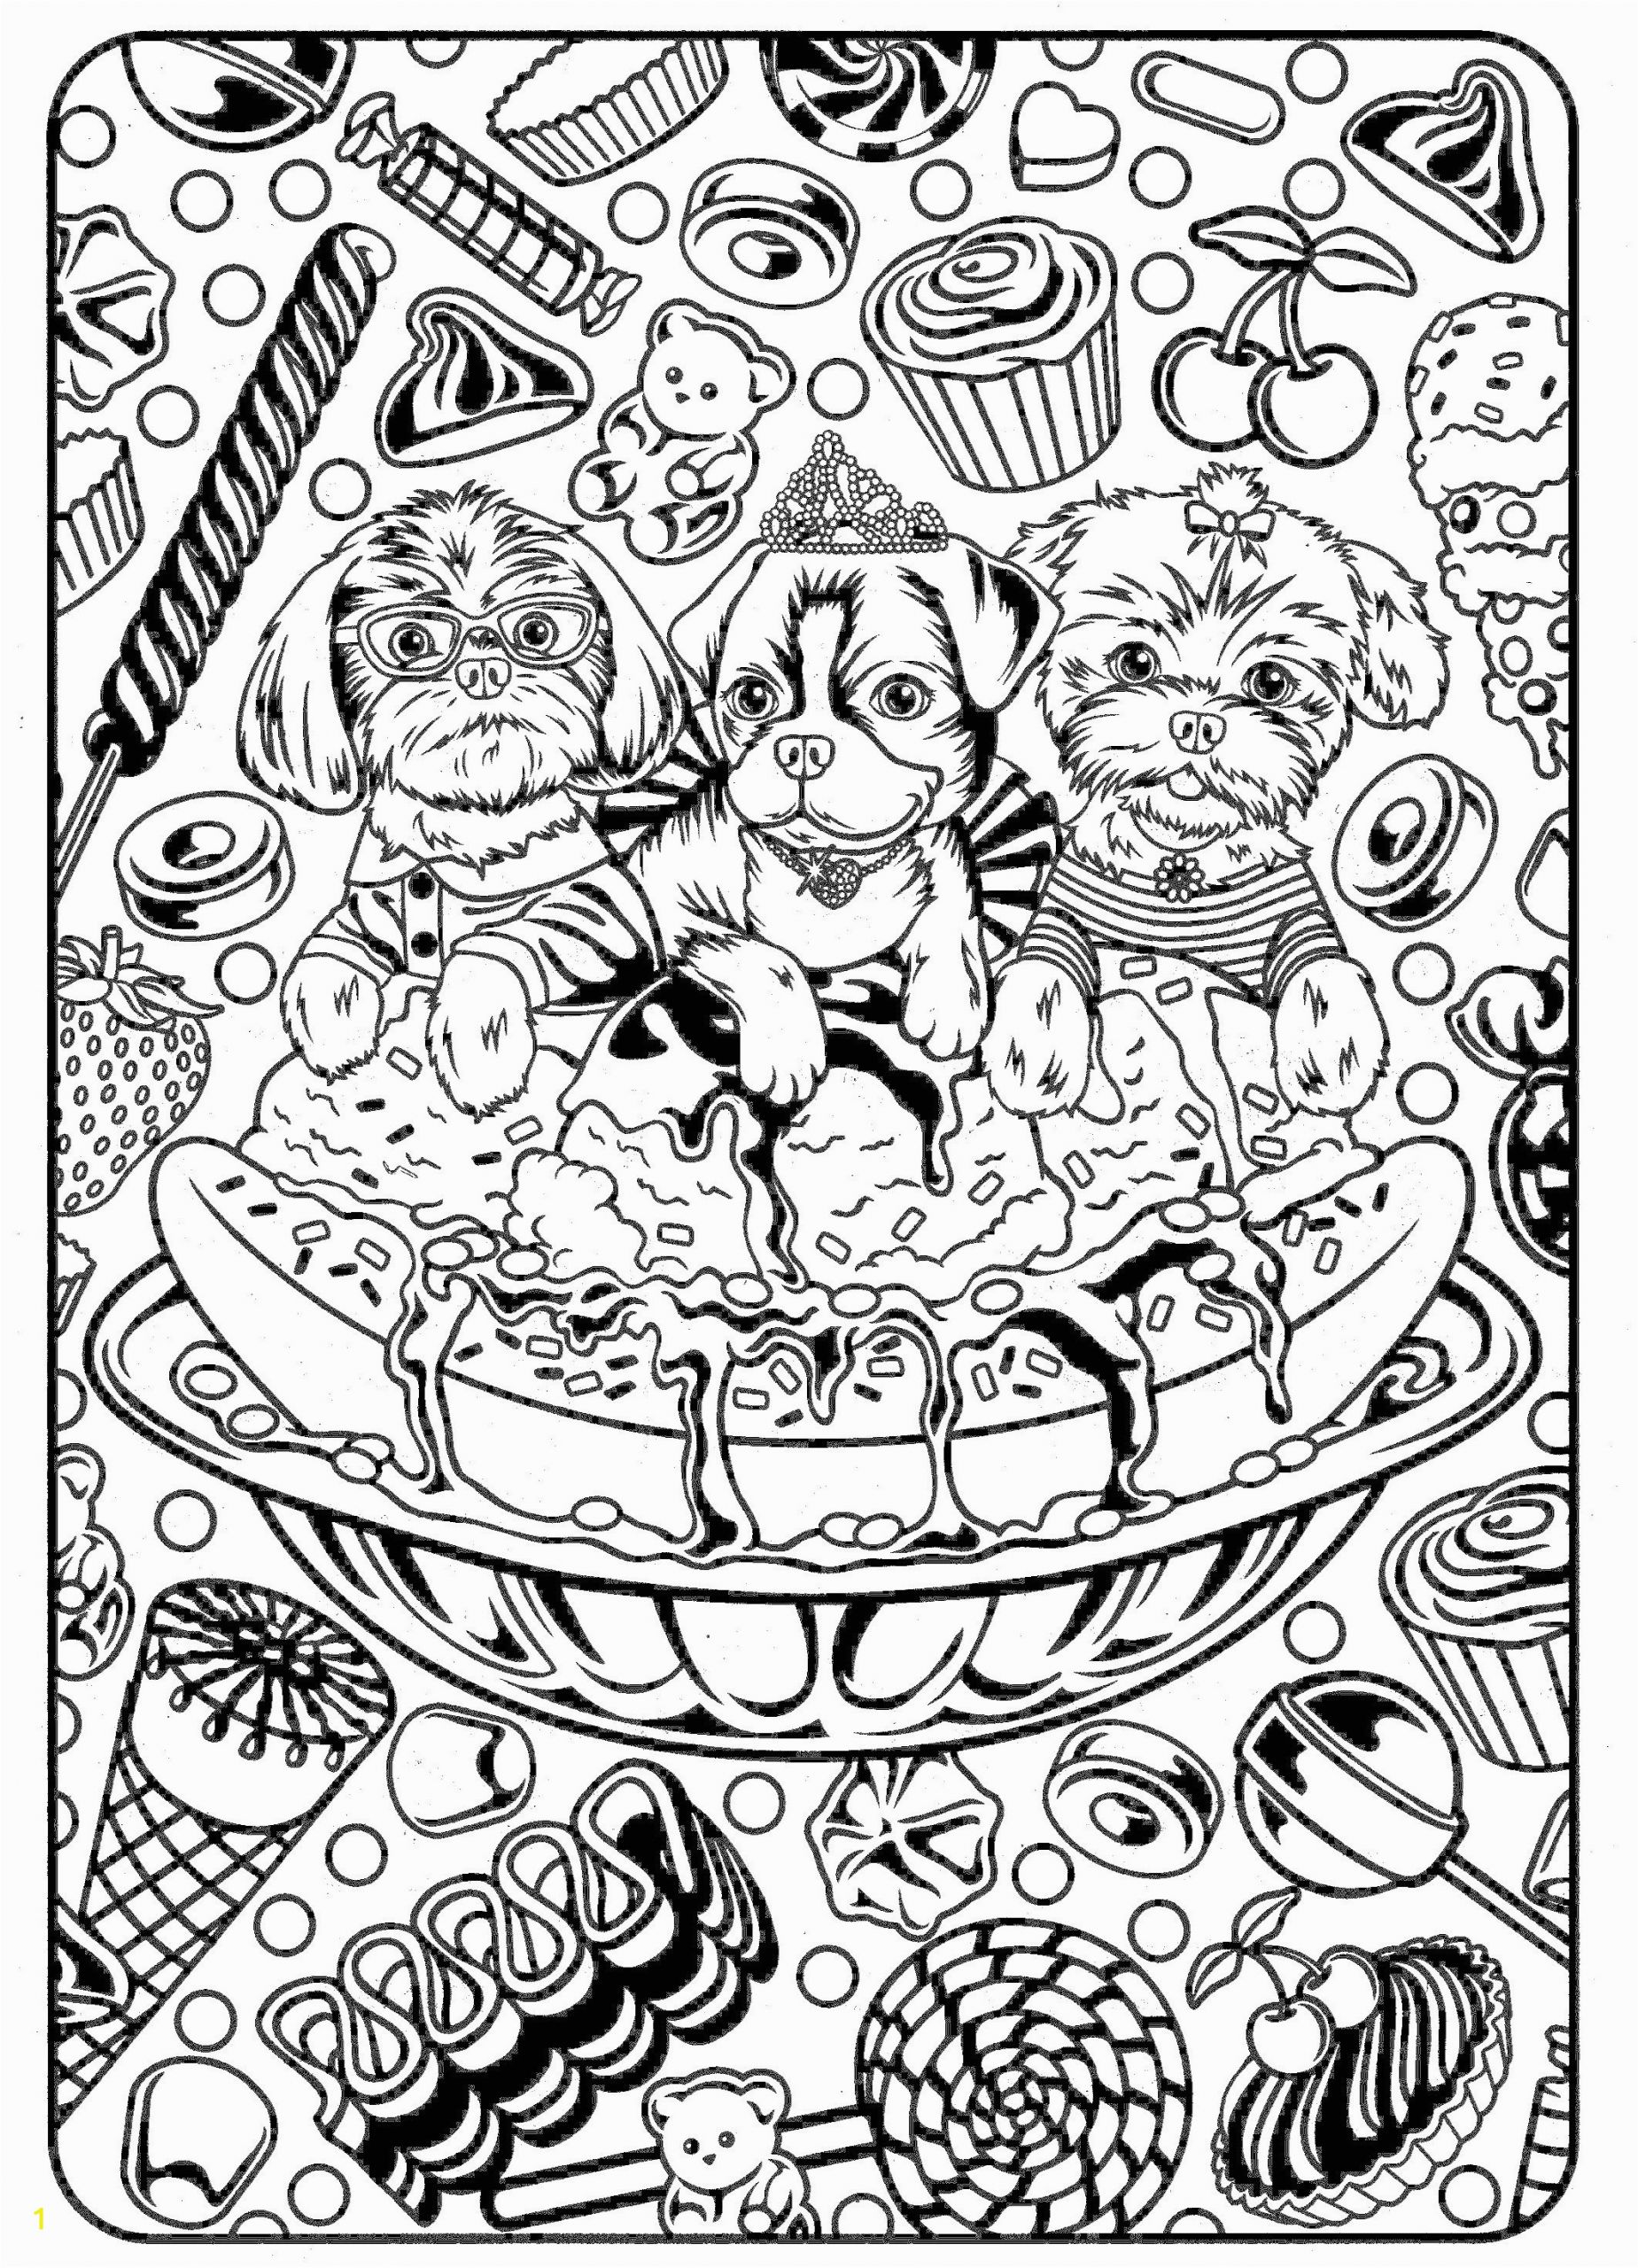 coloring page for free to print luxury photography free coloring pages elegant crayola pages 0d archives se telefonyfo of coloring page for free to print